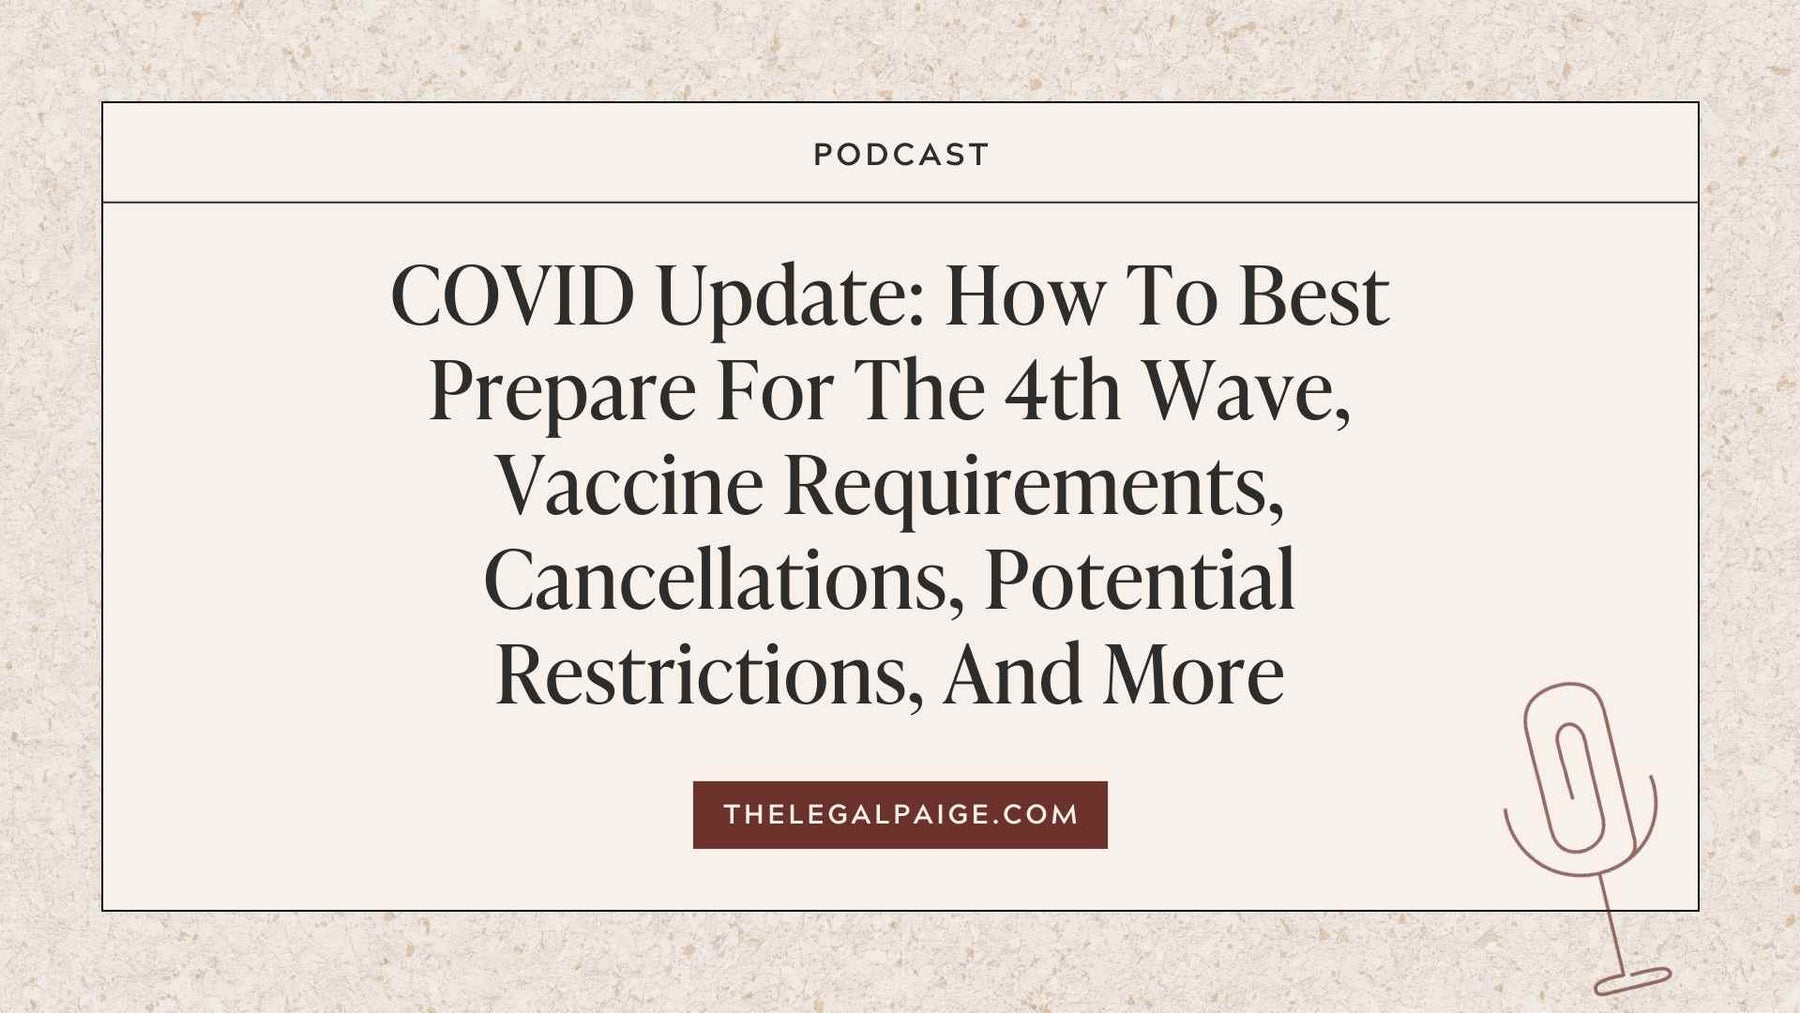 Episode 99: COVID Update: How To Best Prepare For The 4th Wave, Vaccine Requirements, Cancellations, Potential Restrictions, And More